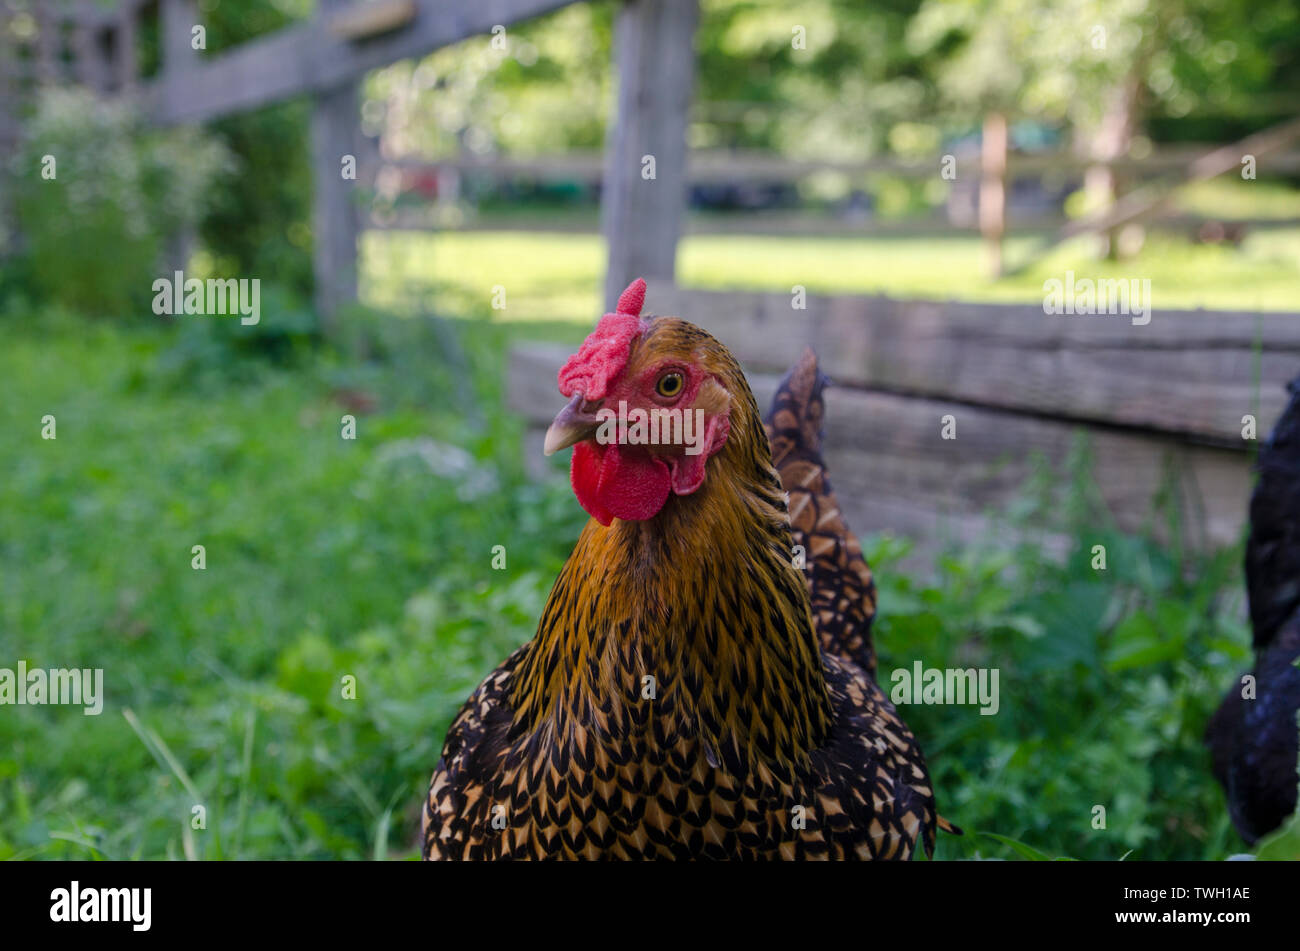 Pature raised beautiful healthy Copper Maran chicken in garden free ranging near fence making eye contact, Maine, USA Stock Photo